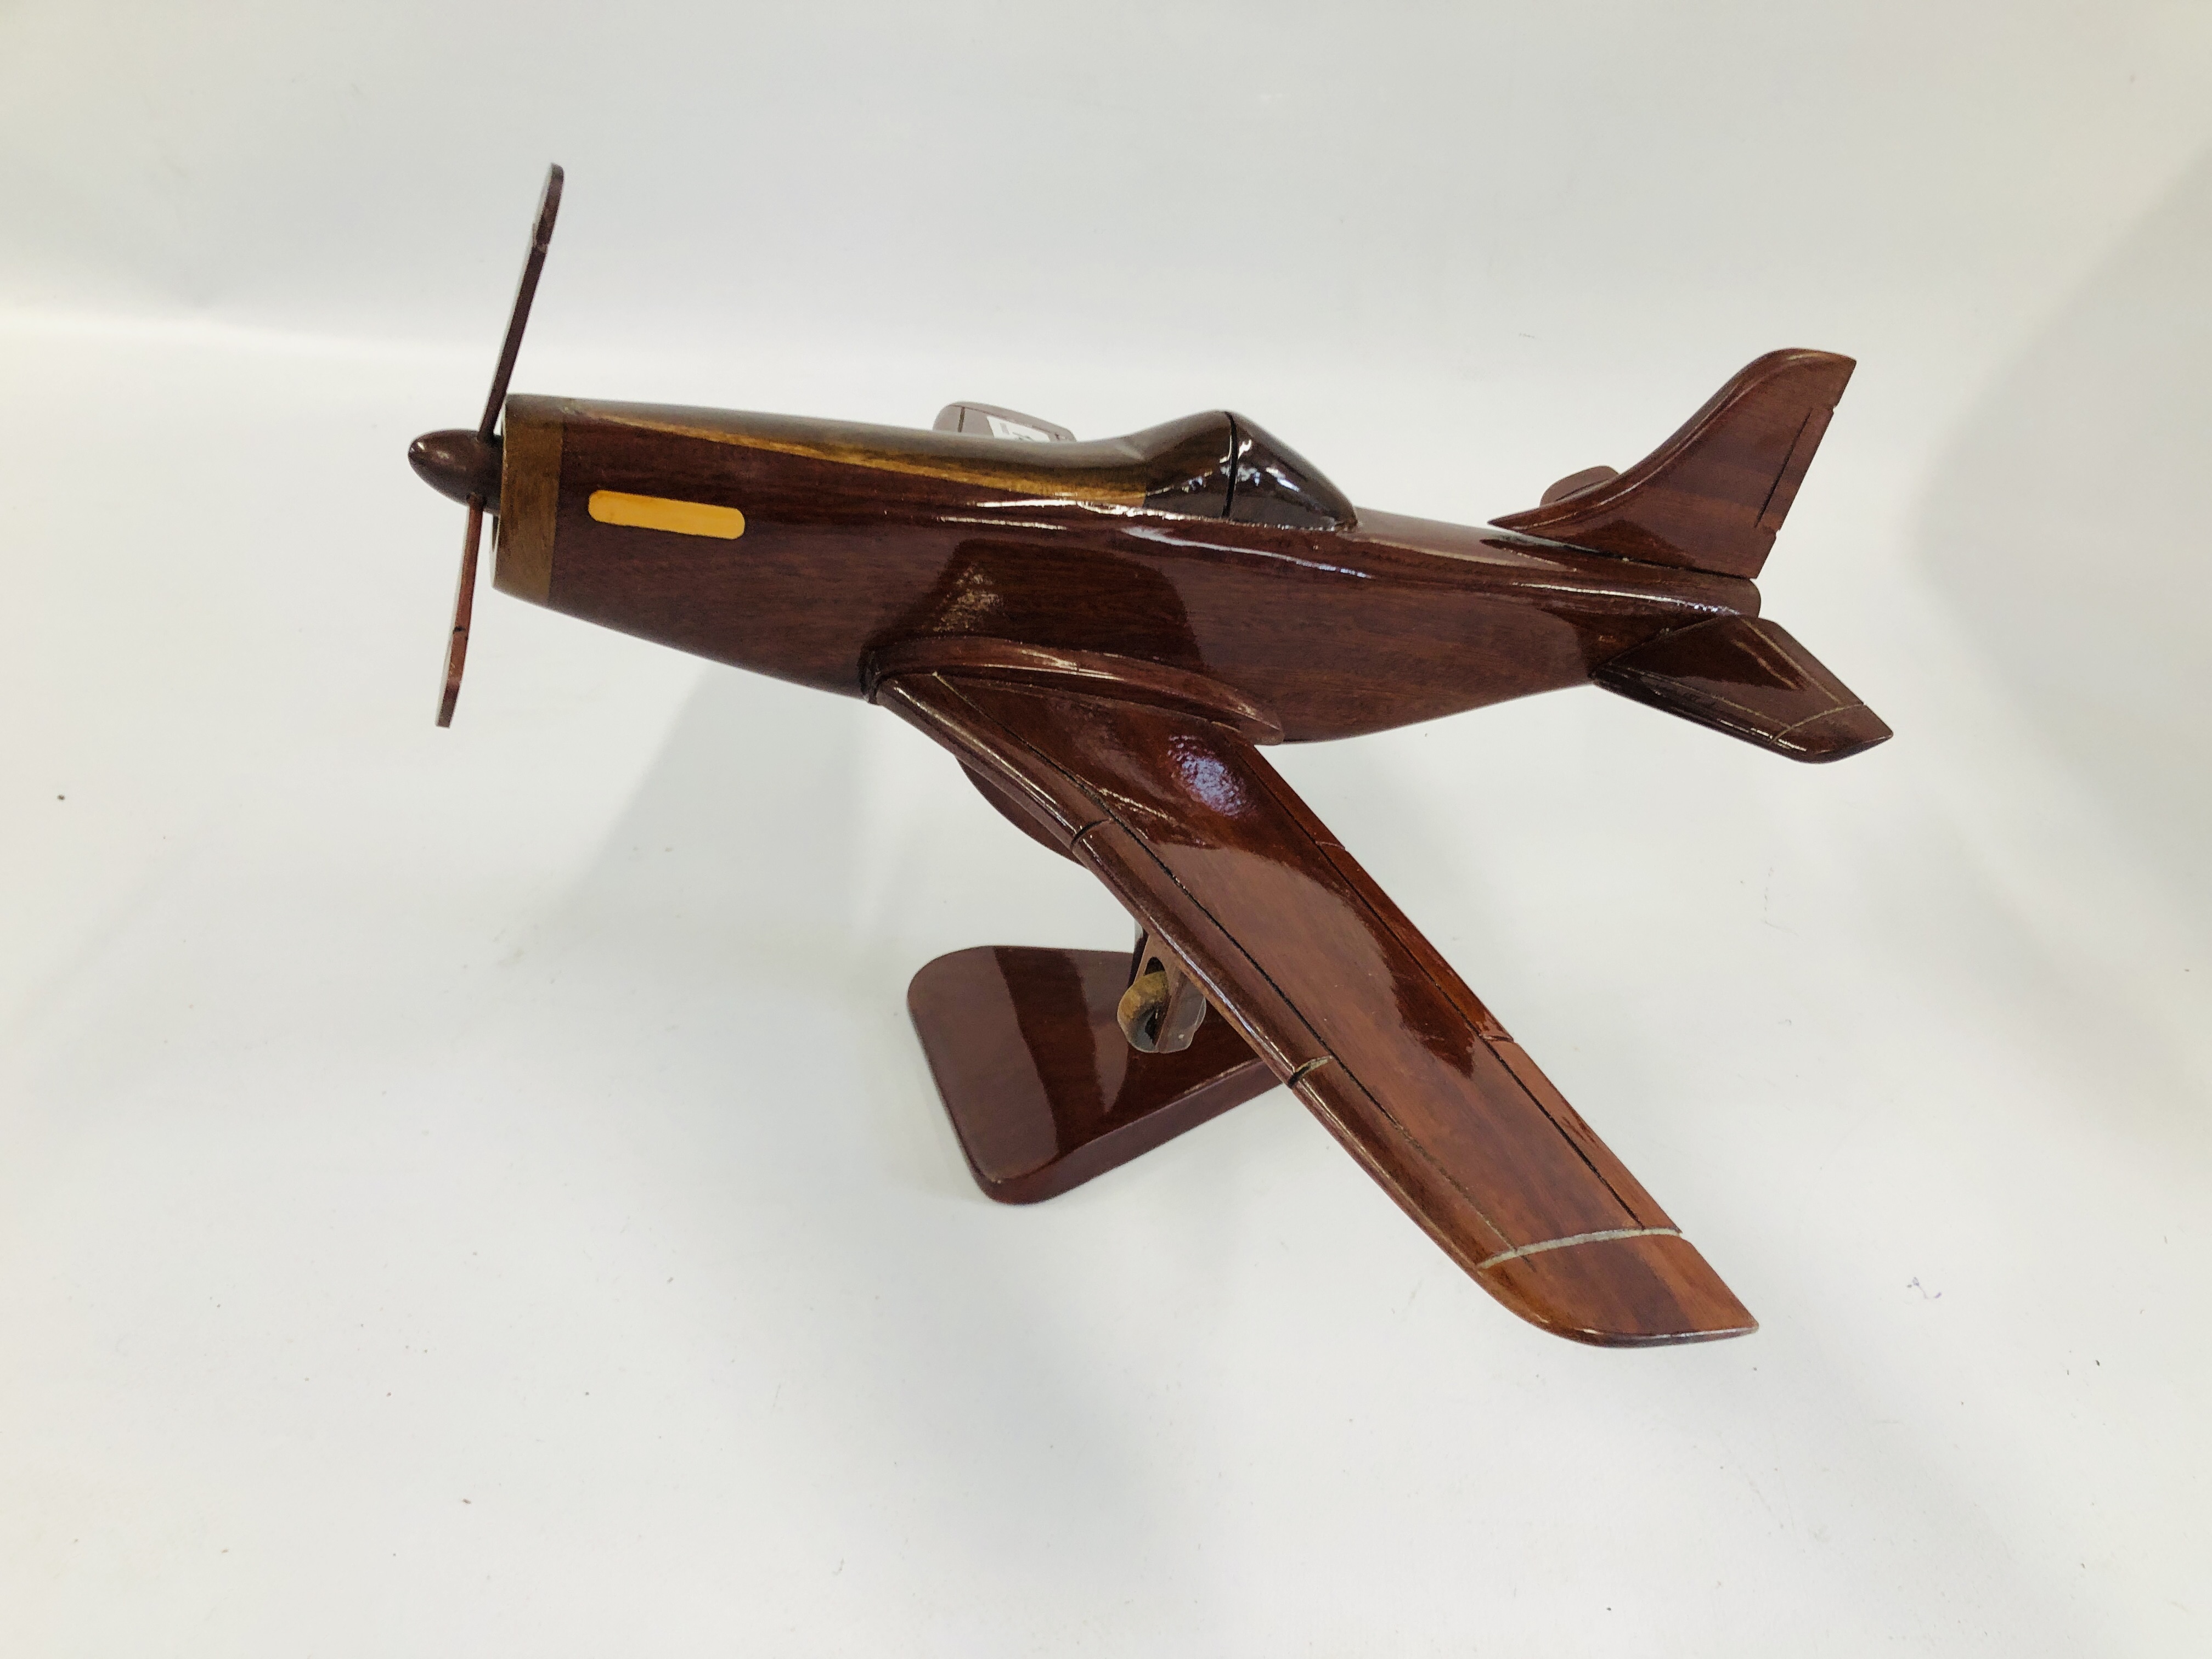 A HAND CRAFTED WOODEN SPITFIRE MODEL. - Image 3 of 4